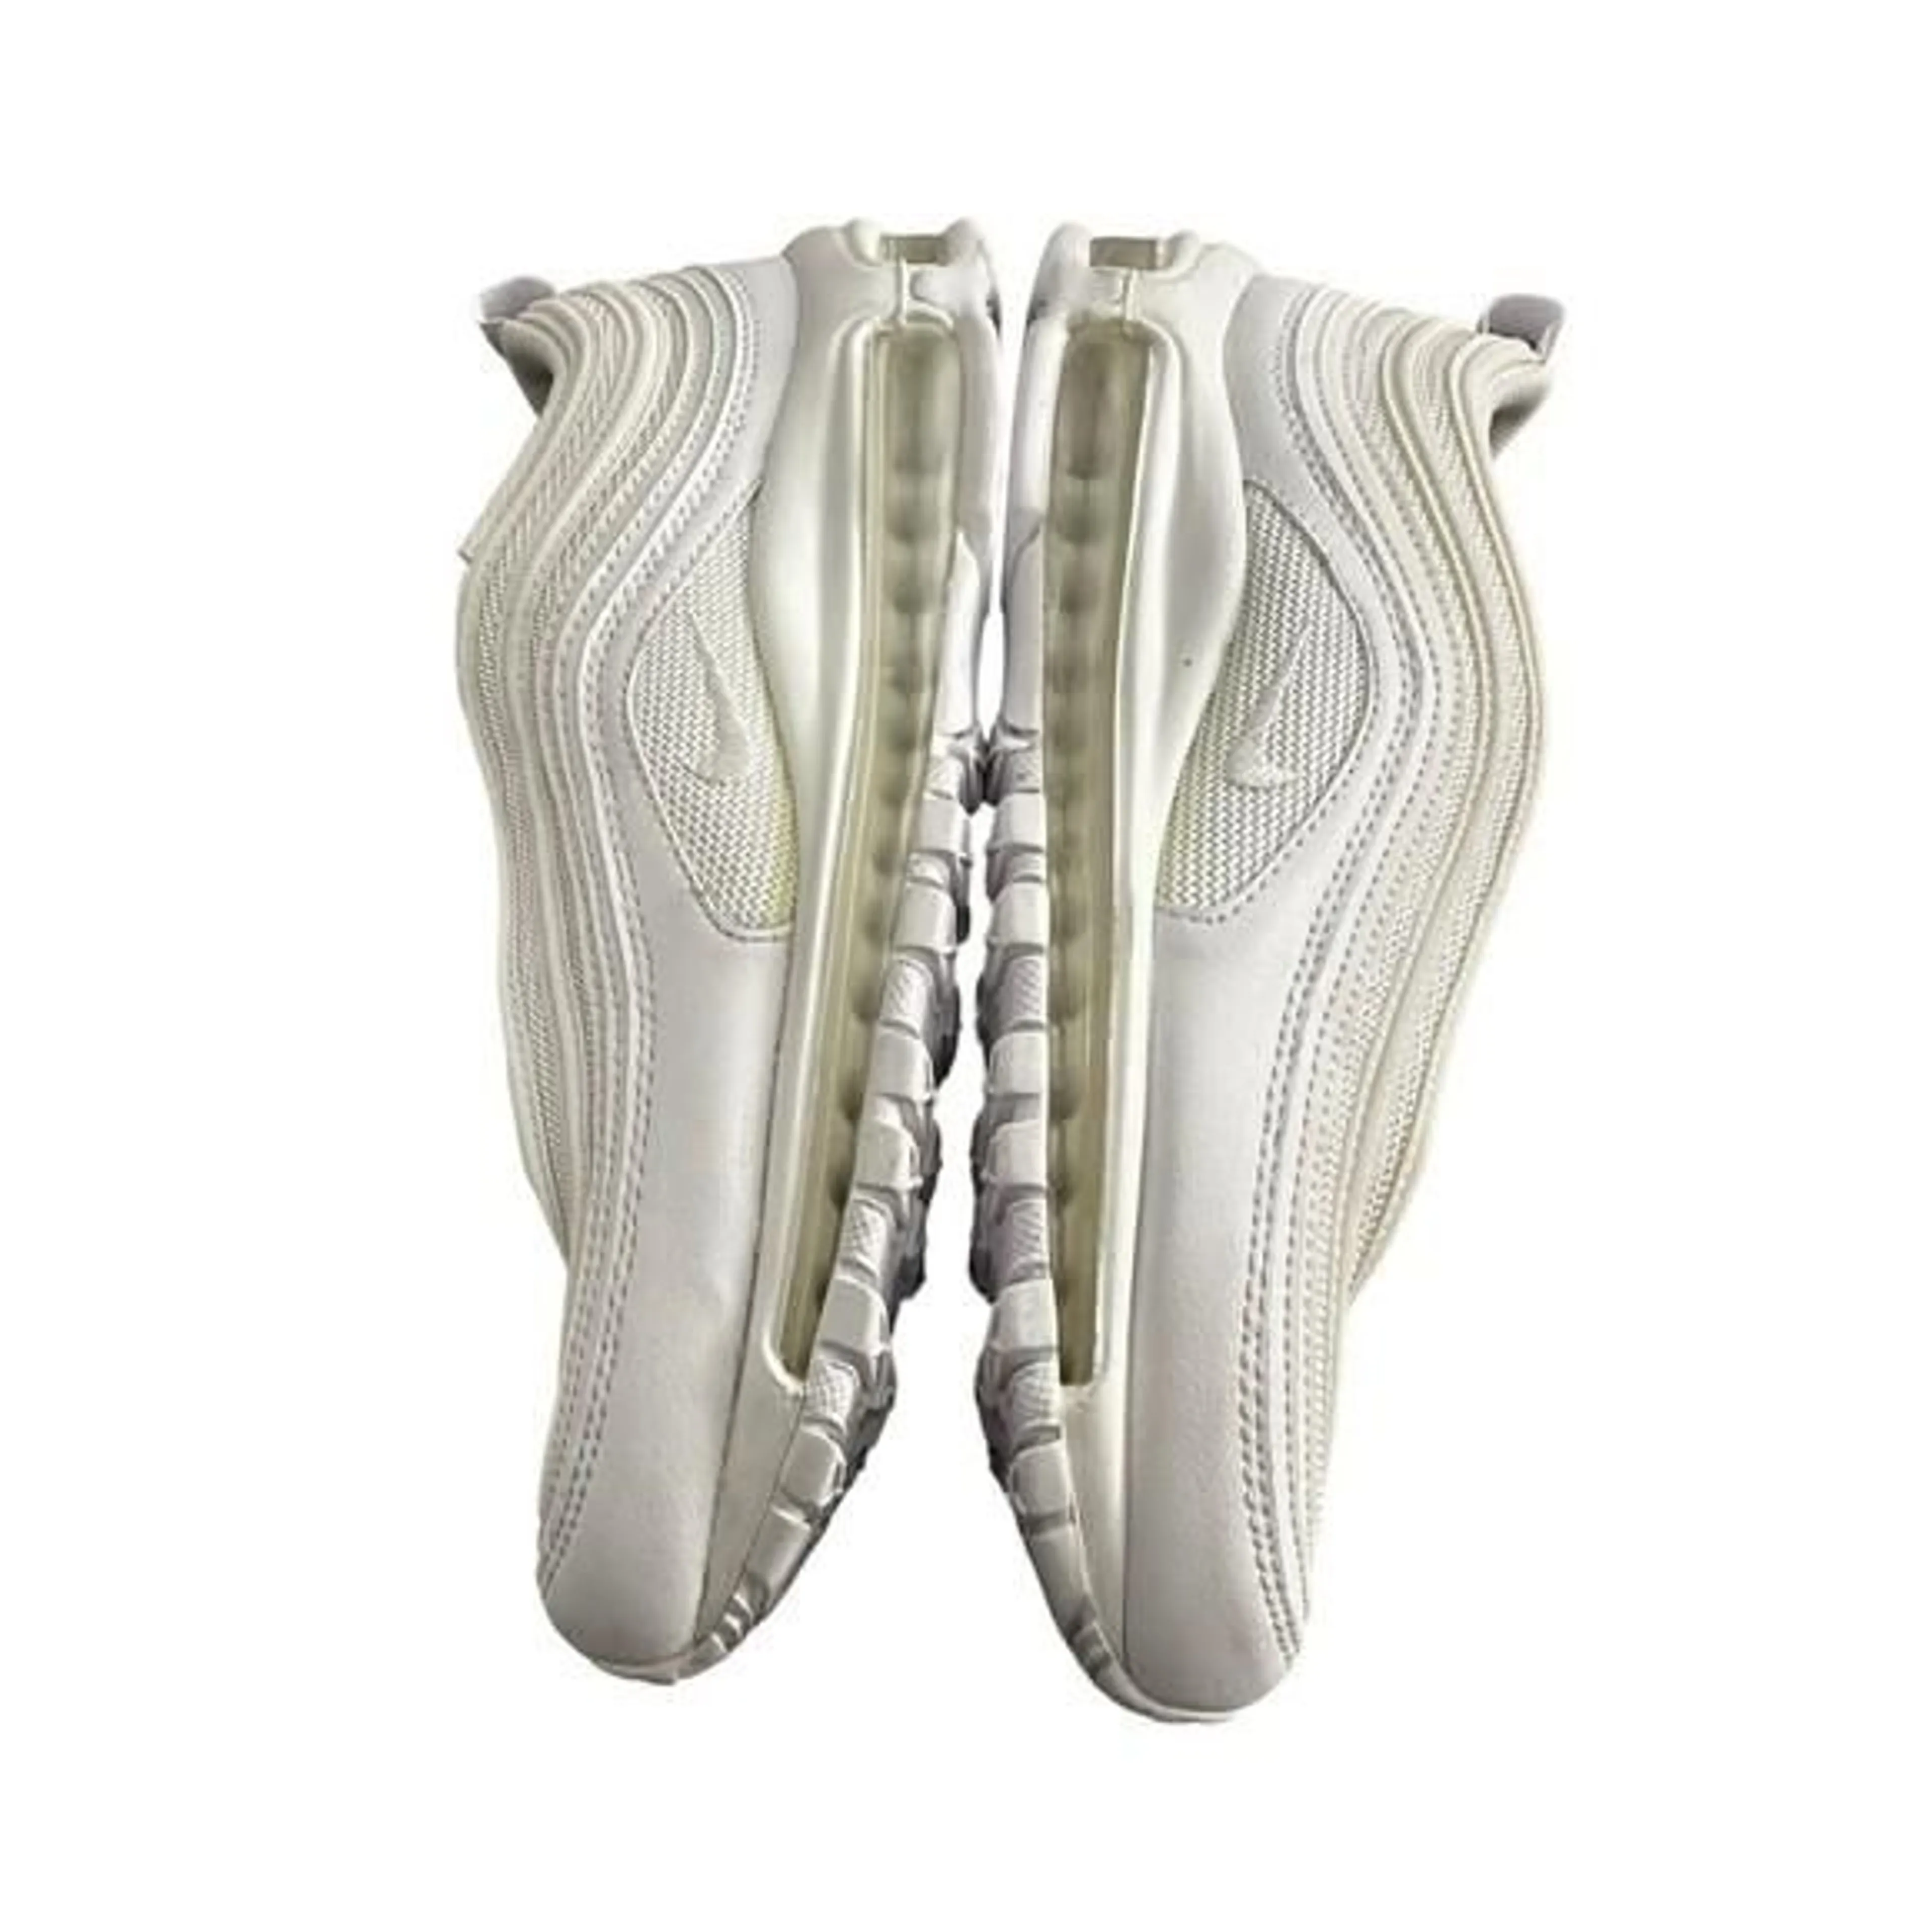 Nike Air Max 97 Triple White DH8016-100 Women's US Size 9 DISPLAY PAIR NEW  · Whatnot: Buy, Sell & Go Live